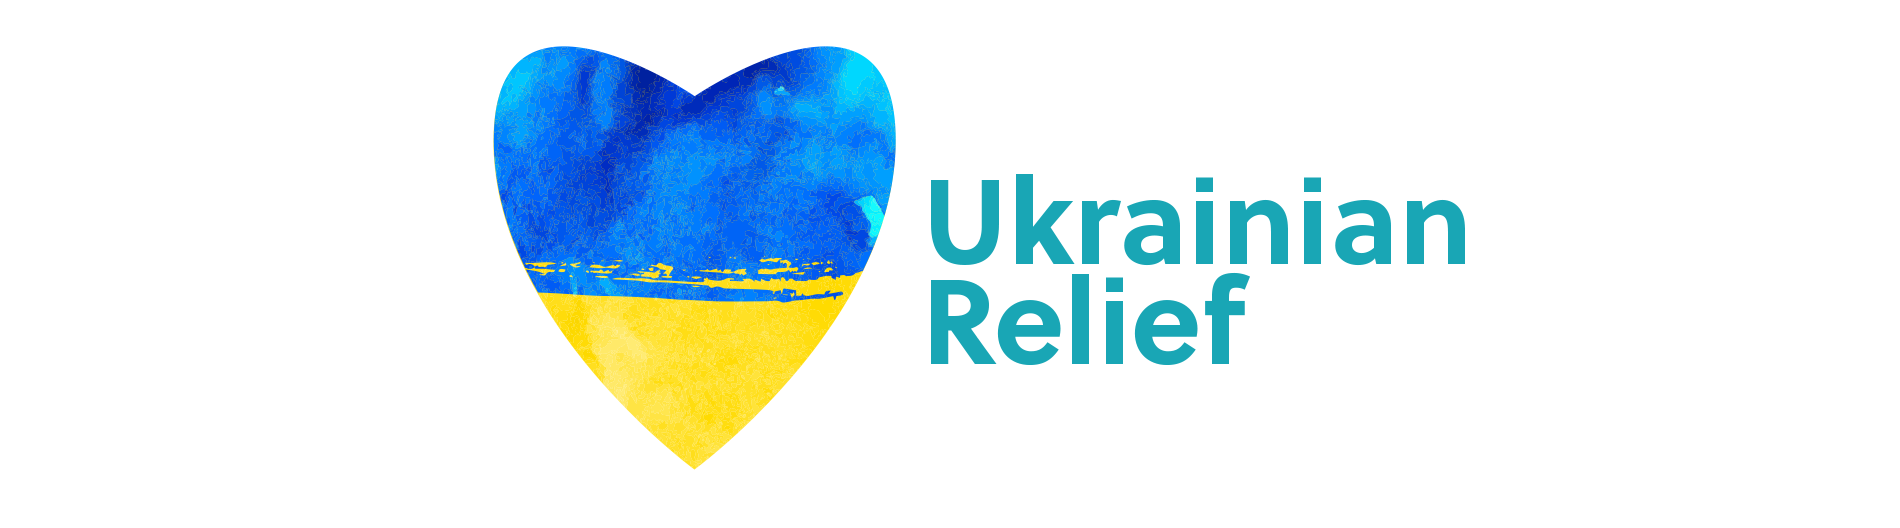 Blue and Yellow Heart for Ukrainian Relief